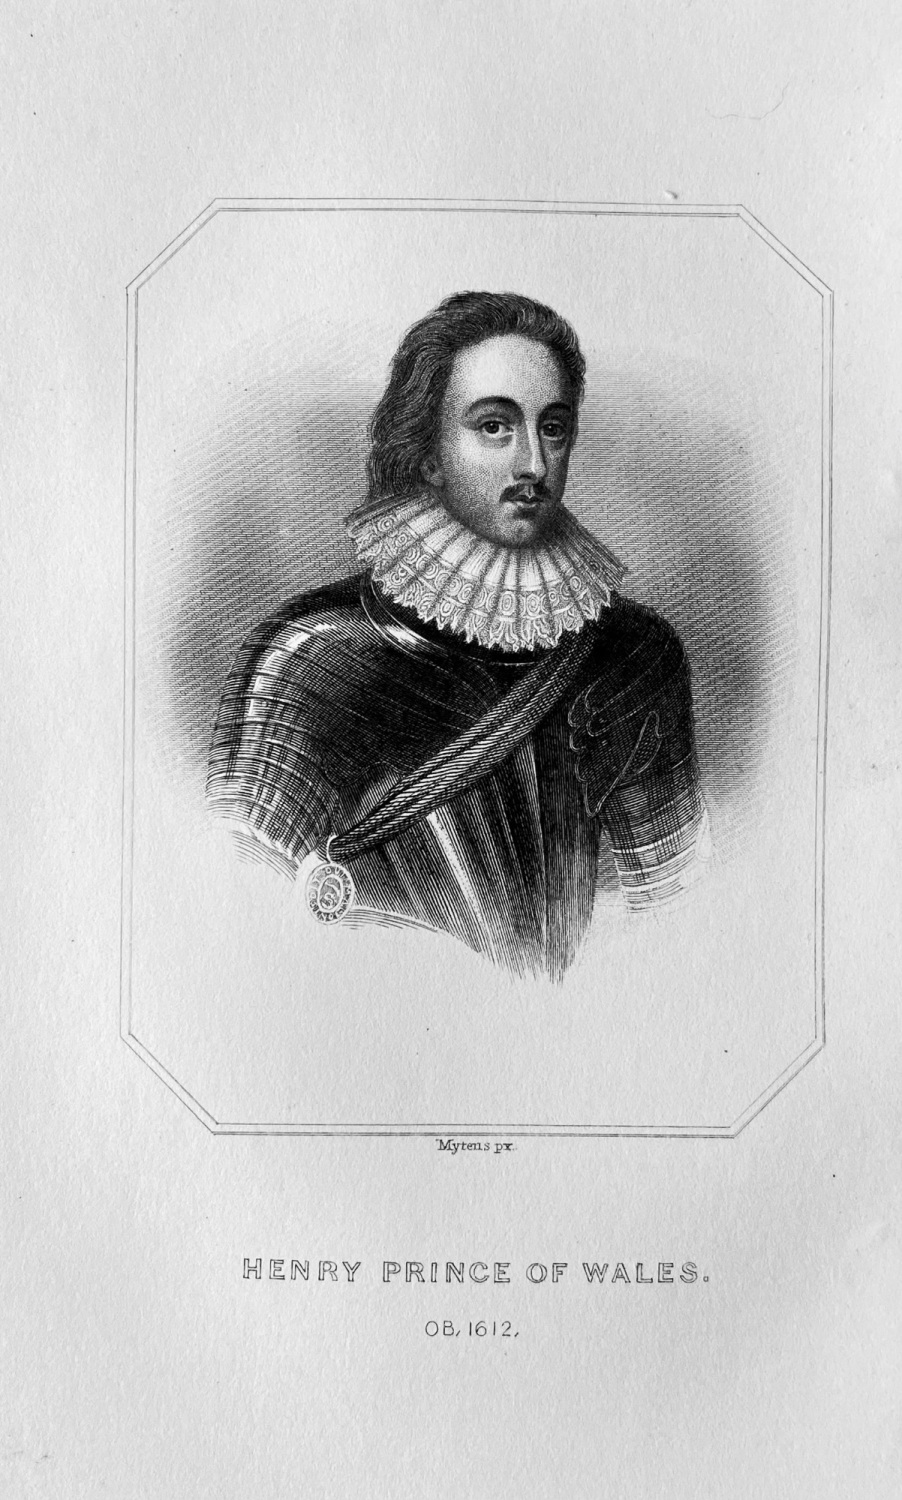 Henry, Prince of Wales.  OB : 1612.